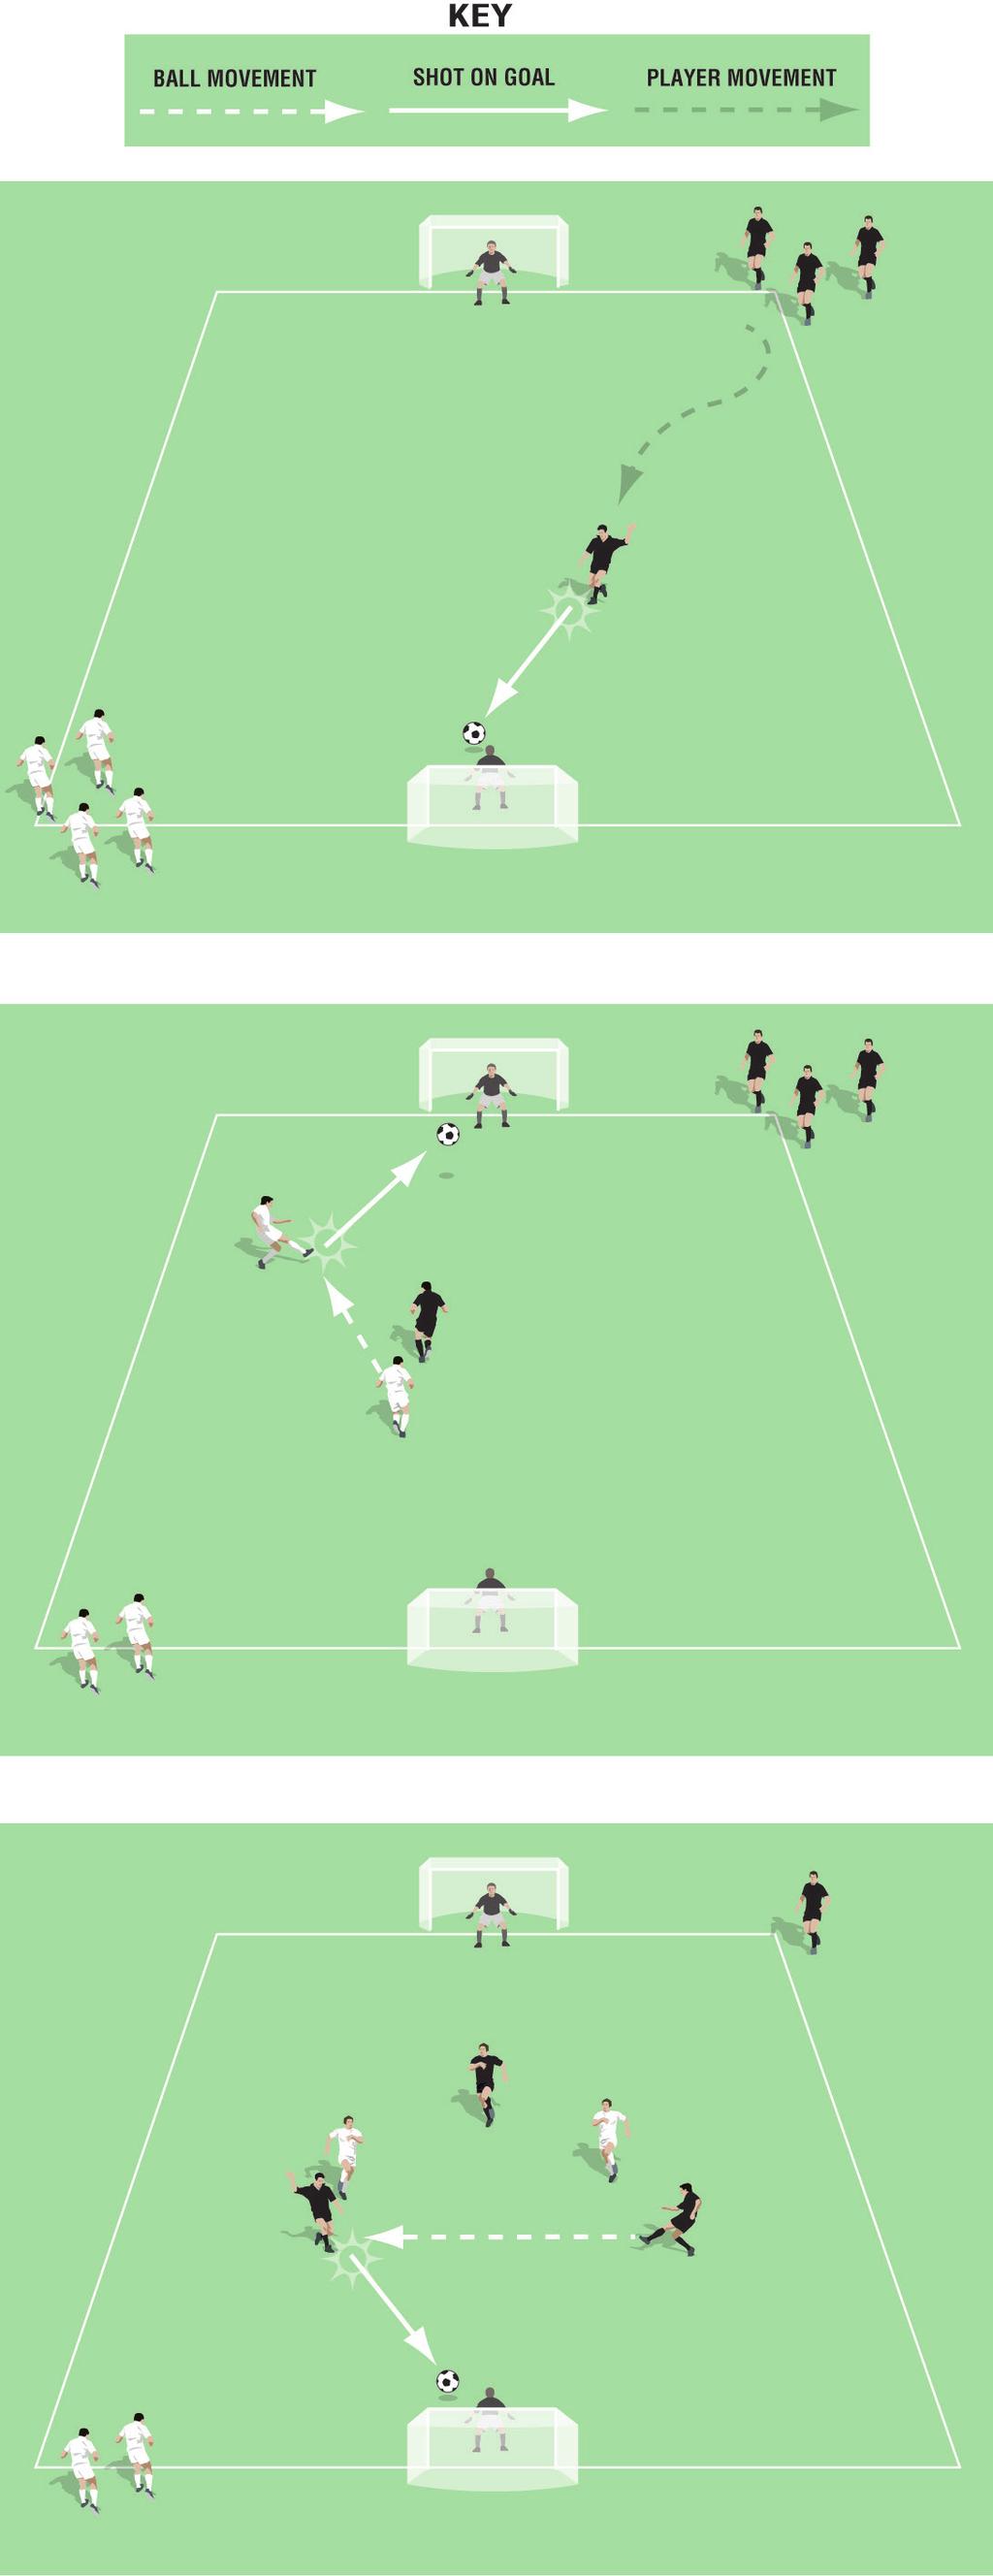 Overoad Game Continuous Pitch size: 0 x 0 yards (minimum) up to 40 x 5 yards (maximum) Two teams of four payers Two keepers If the ba eaves pay, pass a new ba onto the pitch Rues To start the game,